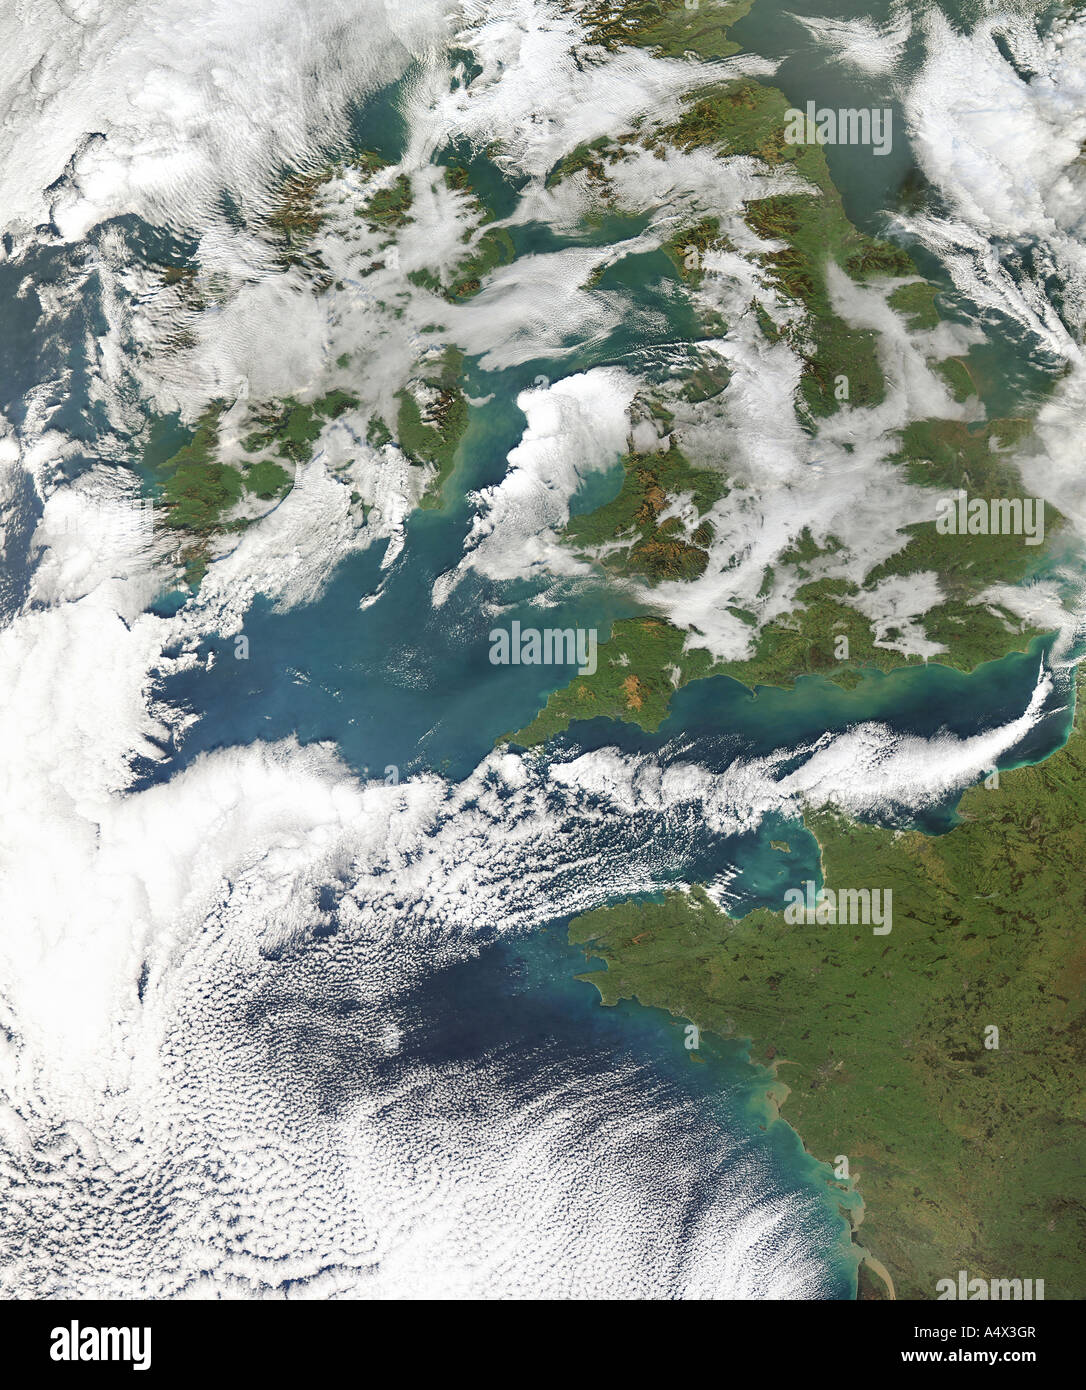 The United Kingdom Ireland and Northern France with cloud formations Optimised version of a Landsat satellite image Stock Photo